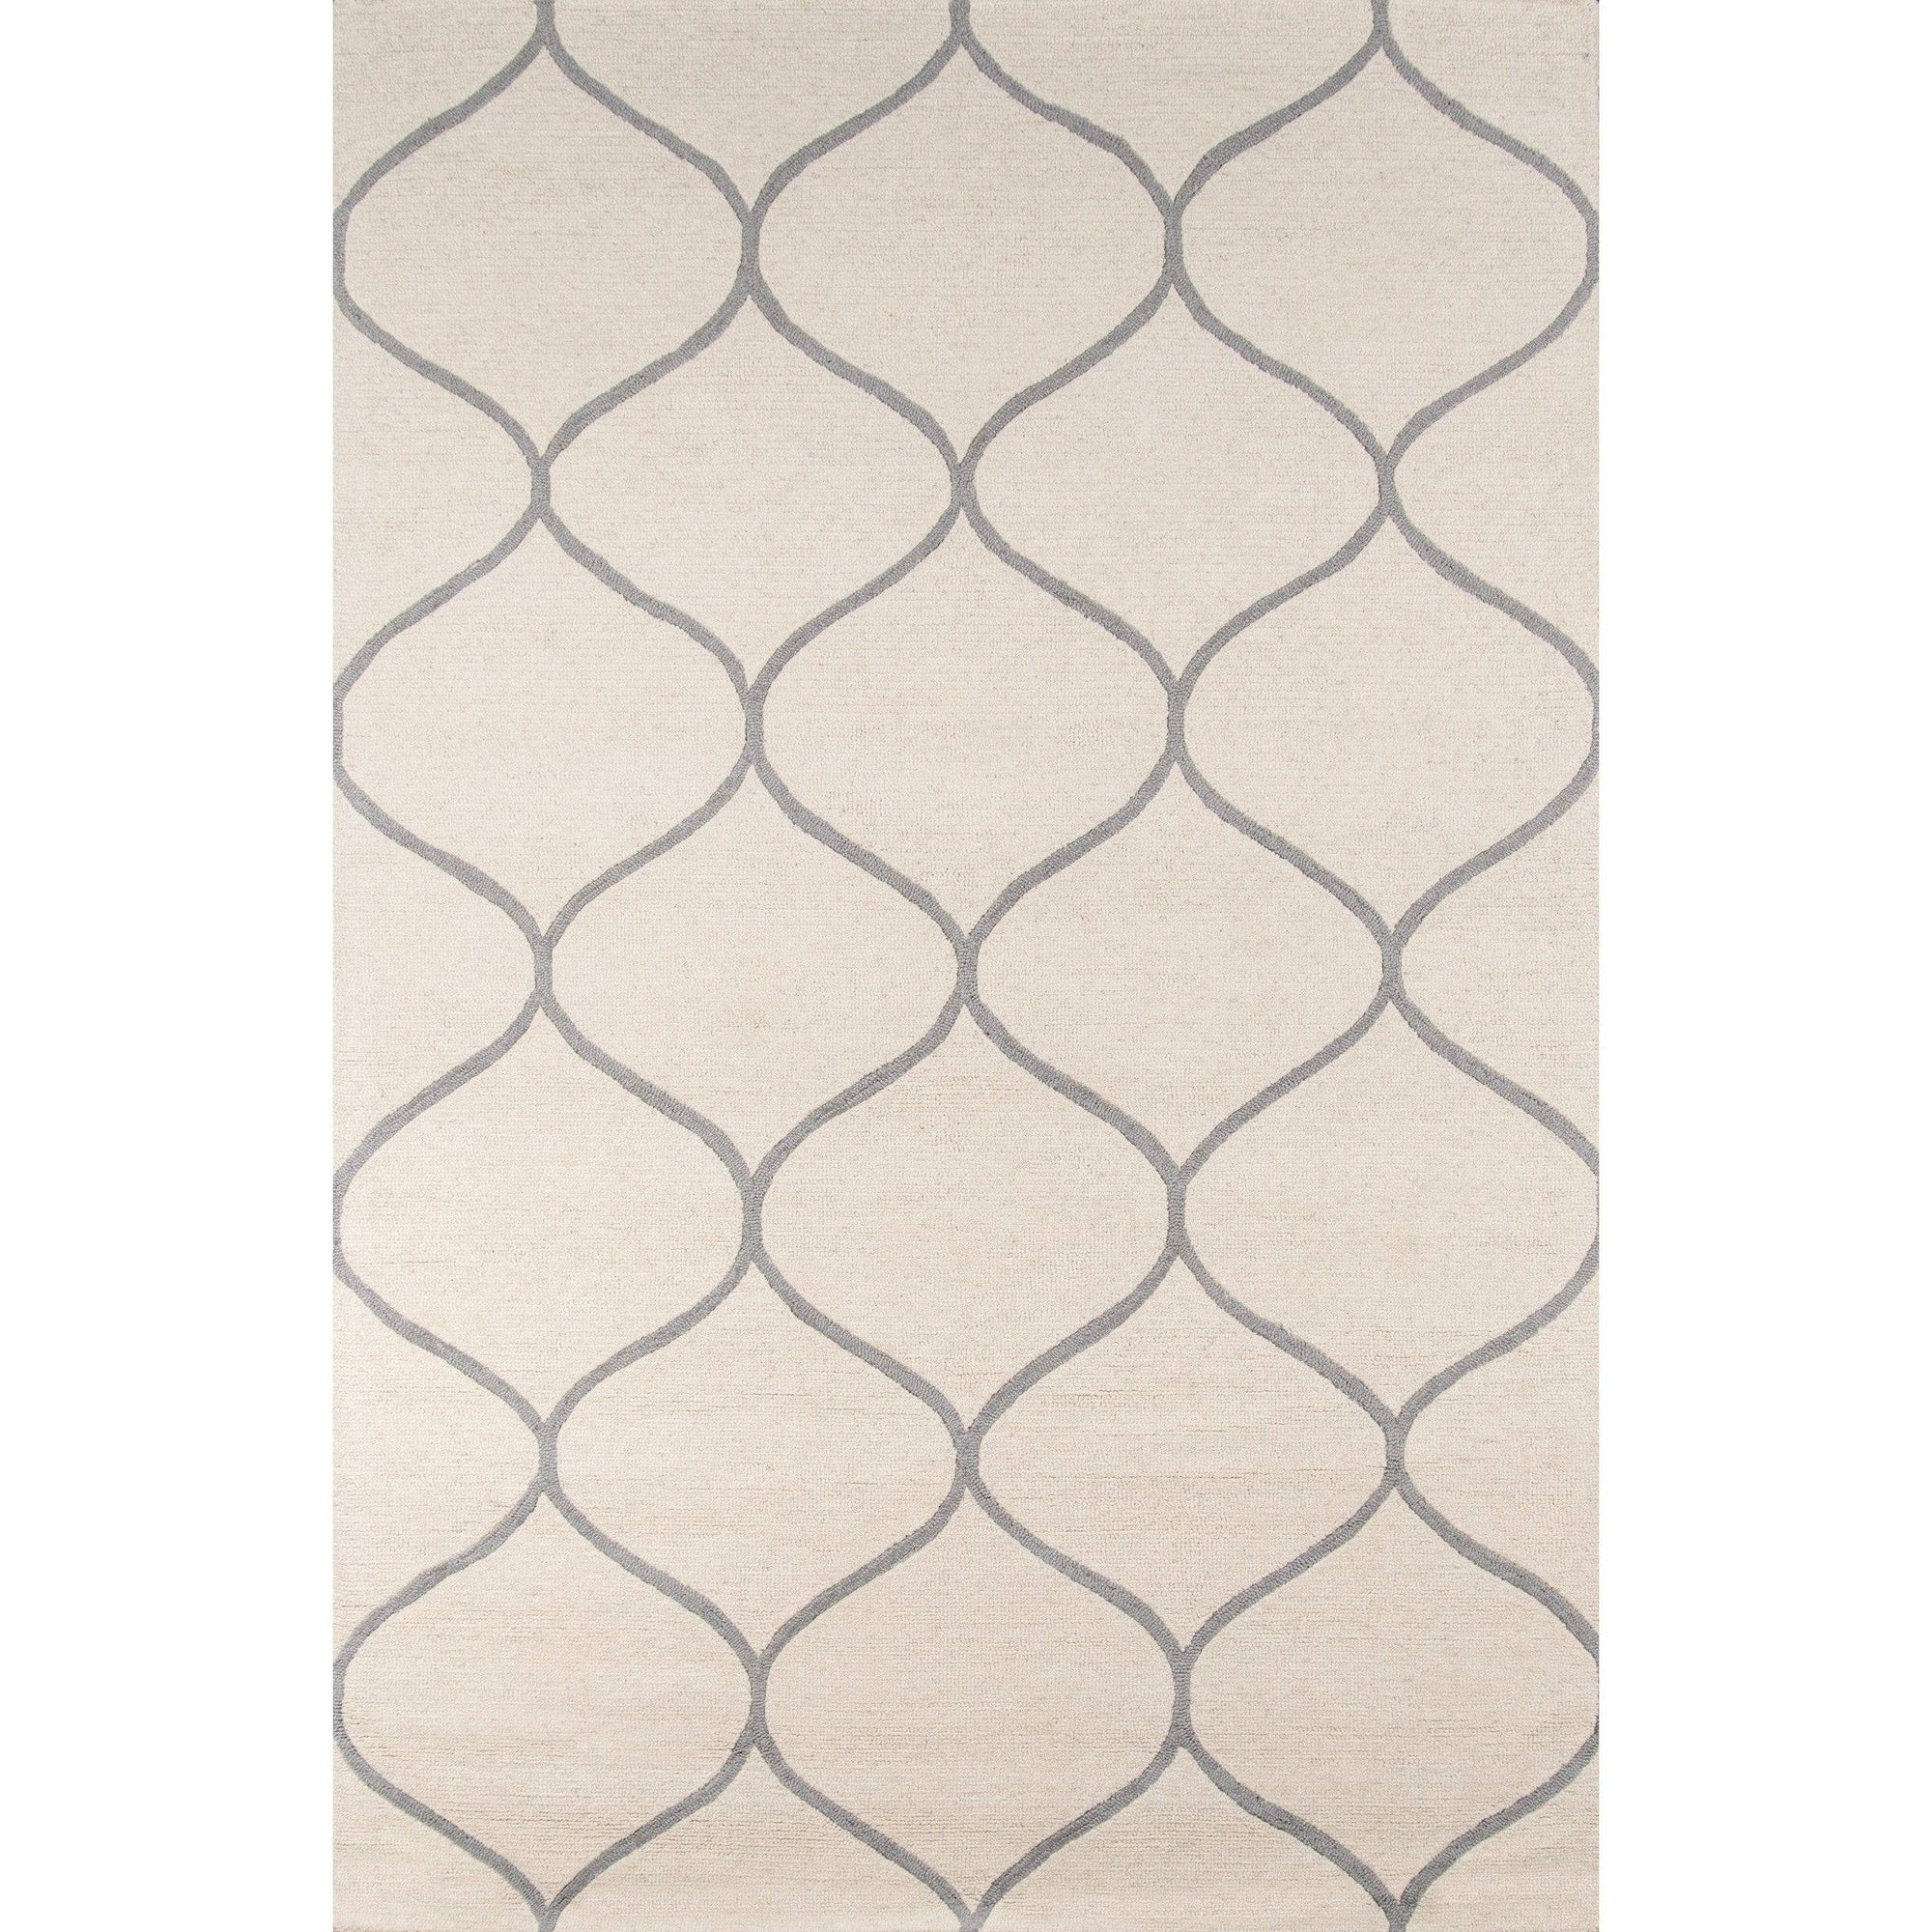 Rugs by Roo | Momeni Newport Ivory Area Rug-NEWPONP-10IVY2030